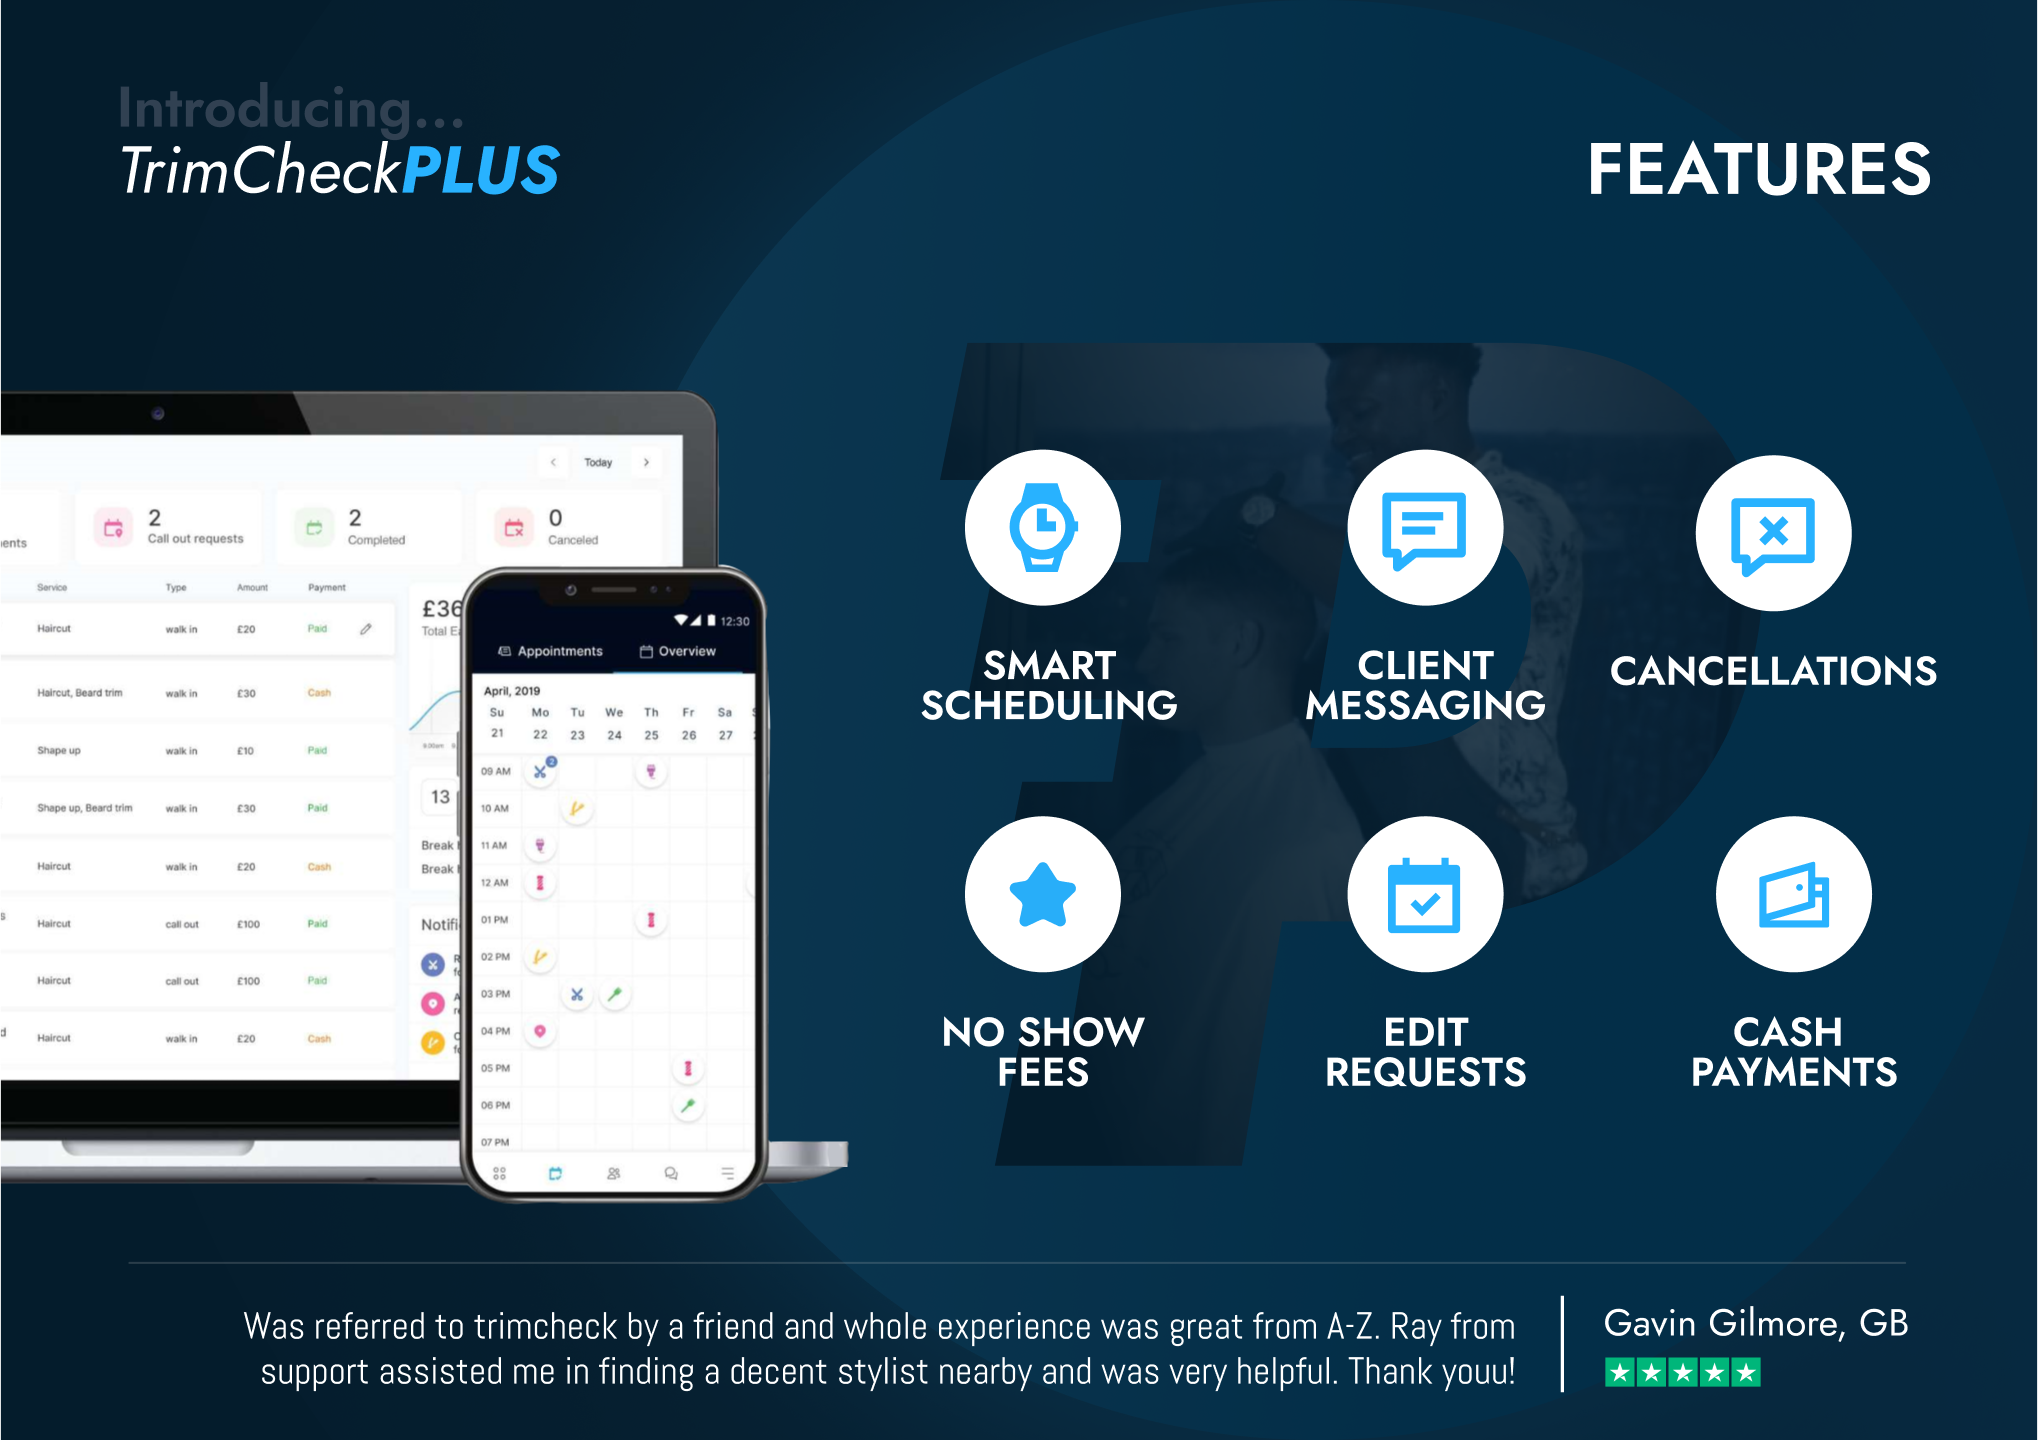 App features include advanced Scheduling, Payment Processing, Messaging, Analytics, Live Call-out Tracking & CRM software